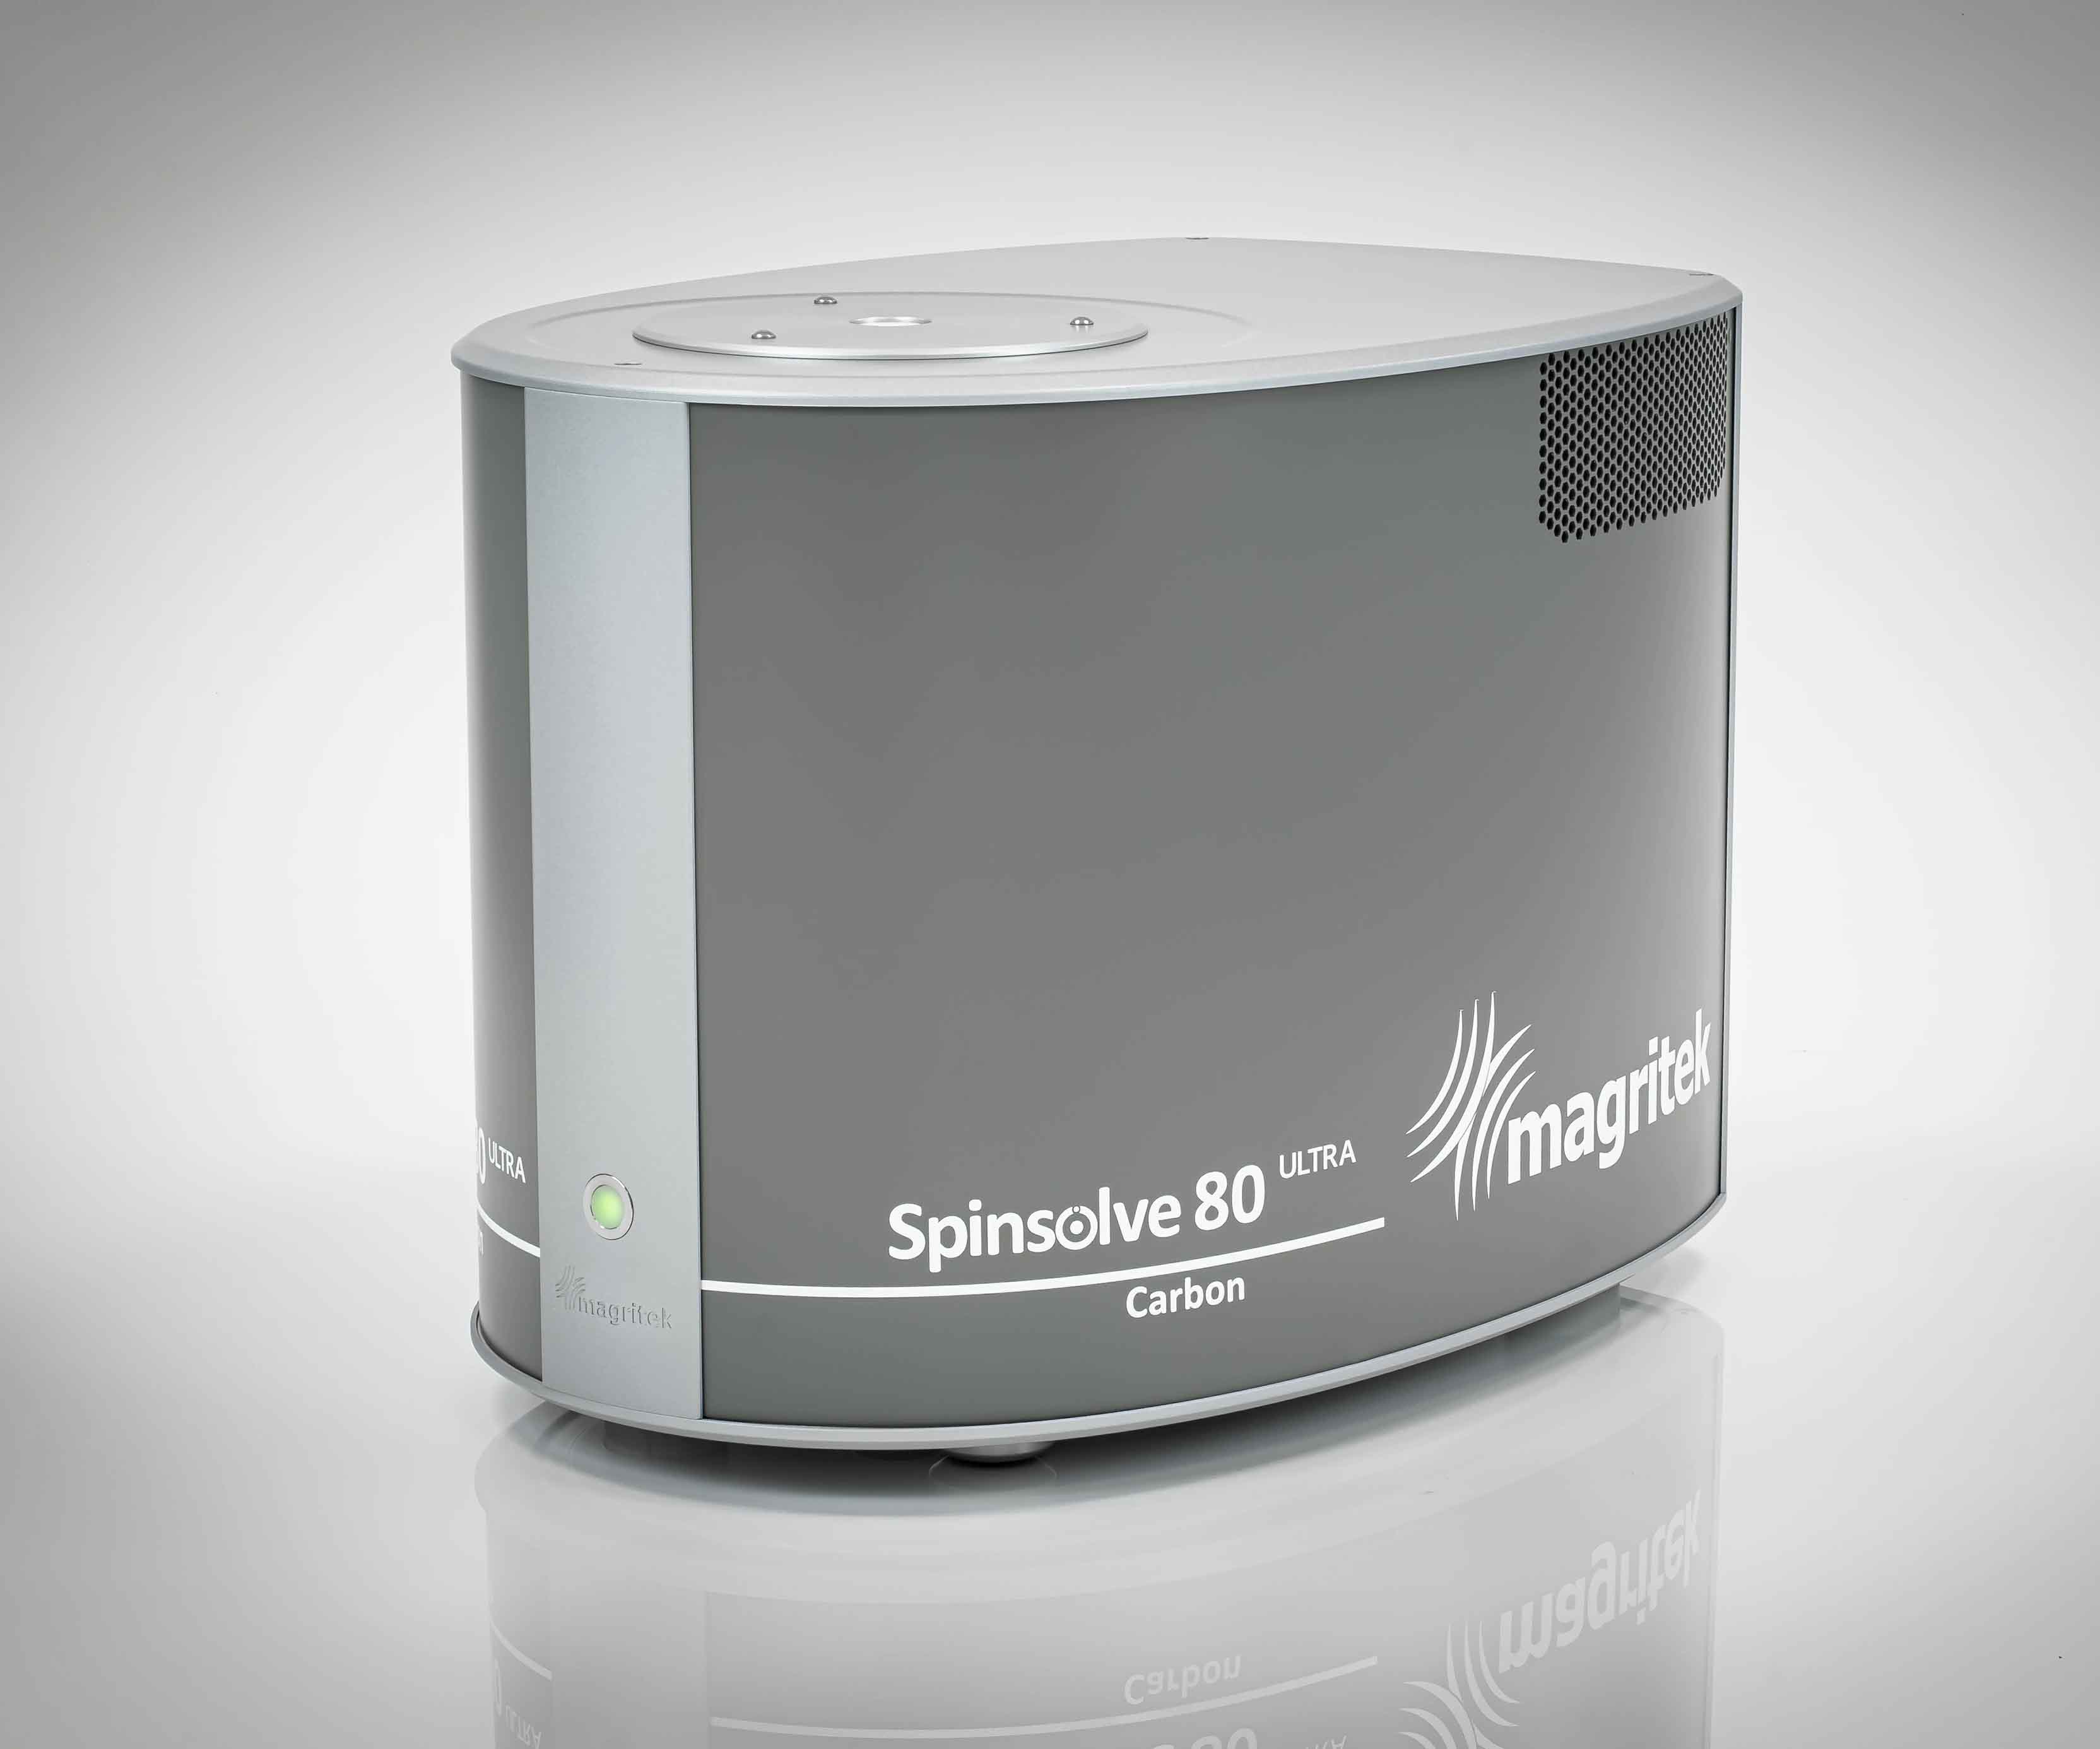 Spinsolve ULTRA NMR Spectrometer is ideal to study biochemical processes like fermentation.